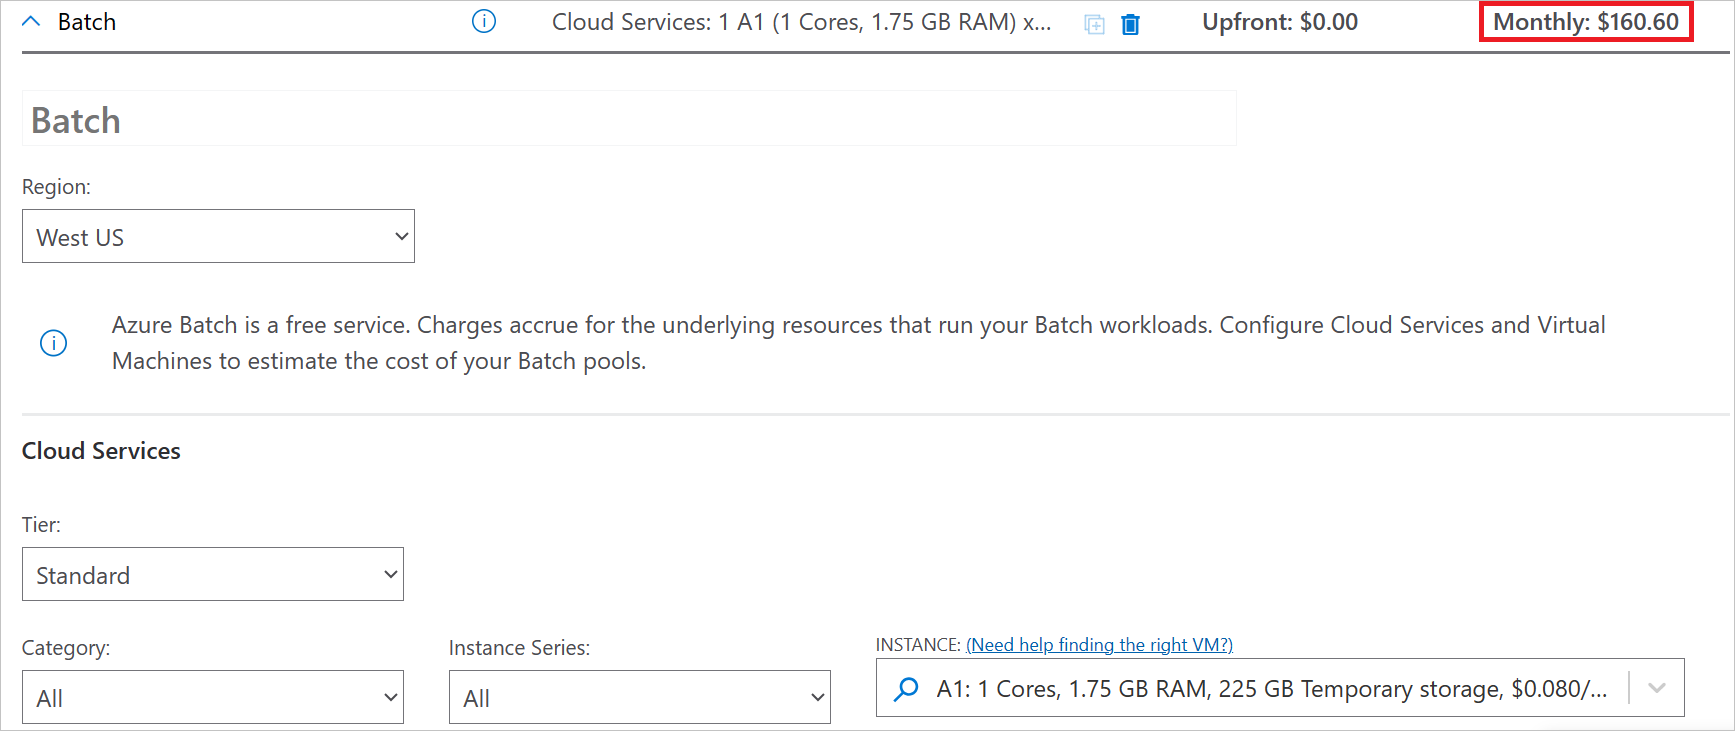 Screenshot showing the your estimate section and main options available for Azure Batch.